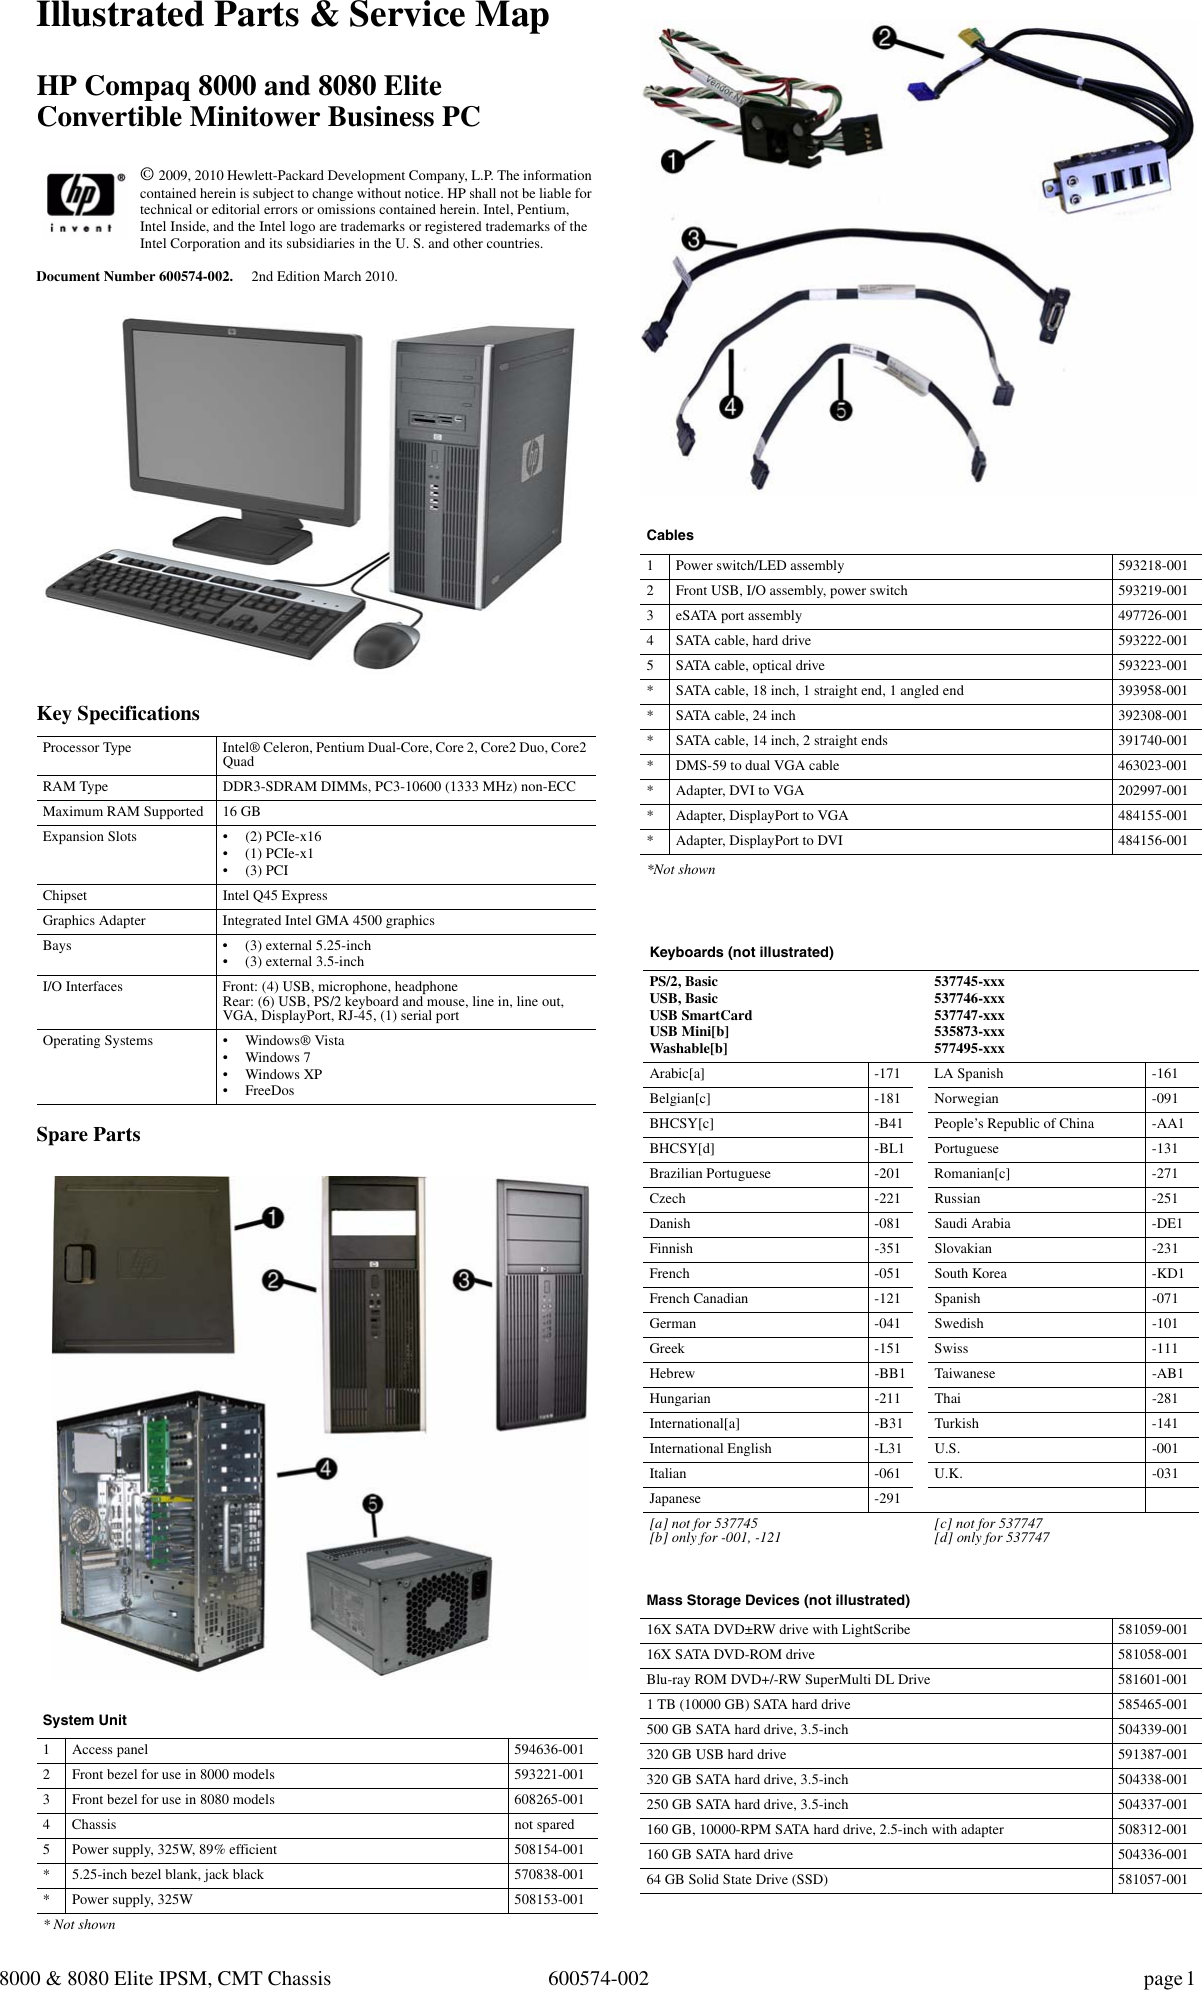 Page 1 of 4 - Hp Hp-Compaq-8000-Elite-Convertible-Minitower-Pc-Service-And-Maintain- China8_PlanetsII CMT IPSM  Hp-compaq-8000-elite-convertible-minitower-pc-service-and-maintain